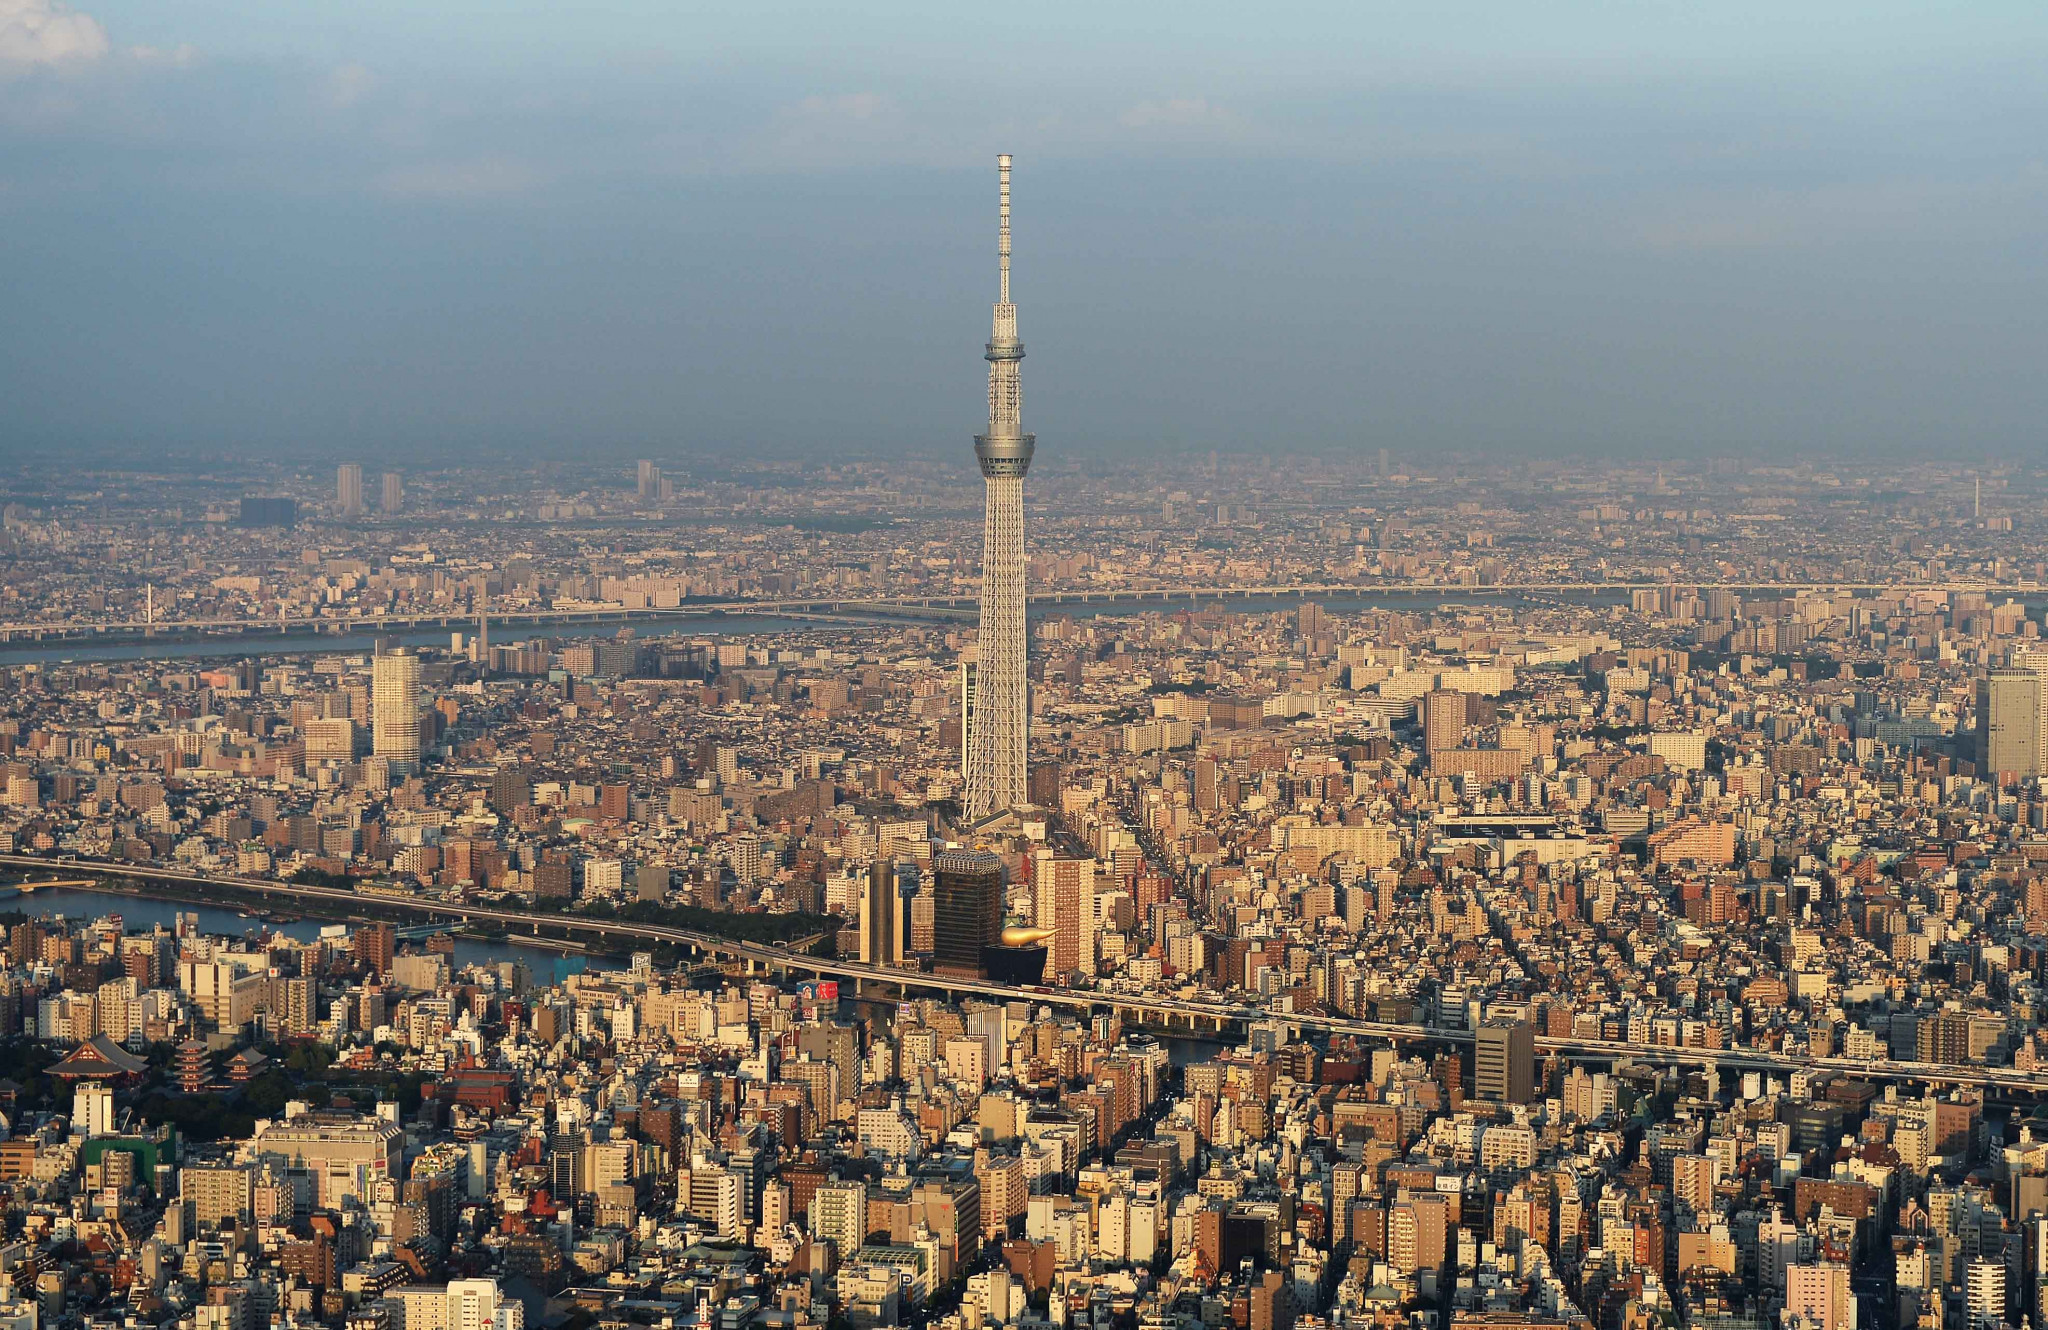 The Tokyo Skytree is a prominent landmark in the Japanese capital ©Getty Images